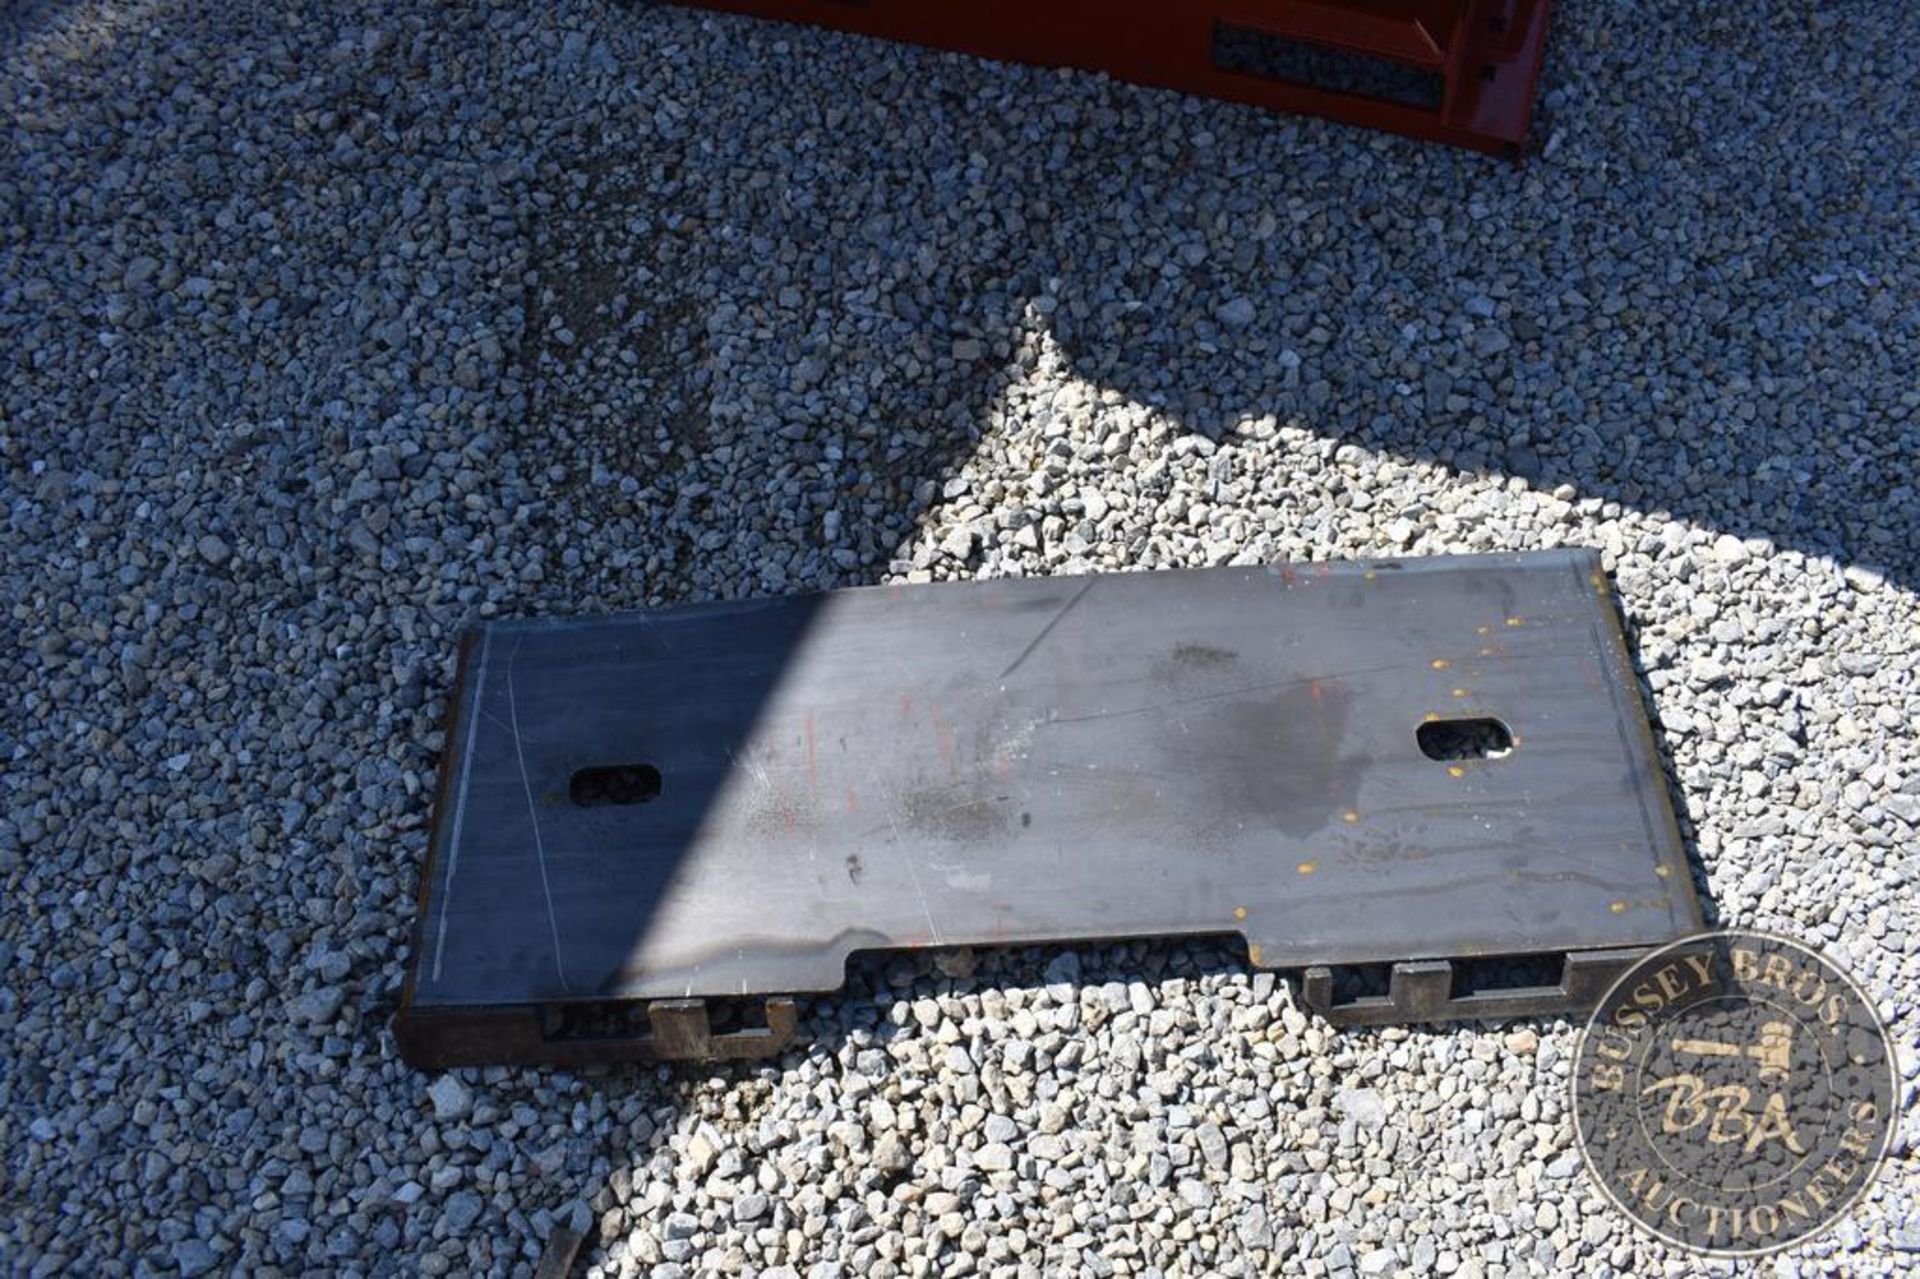 Hitch KIT CONTAINERS SKID STEER WELDABLE PLATE 27296 - Image 2 of 2